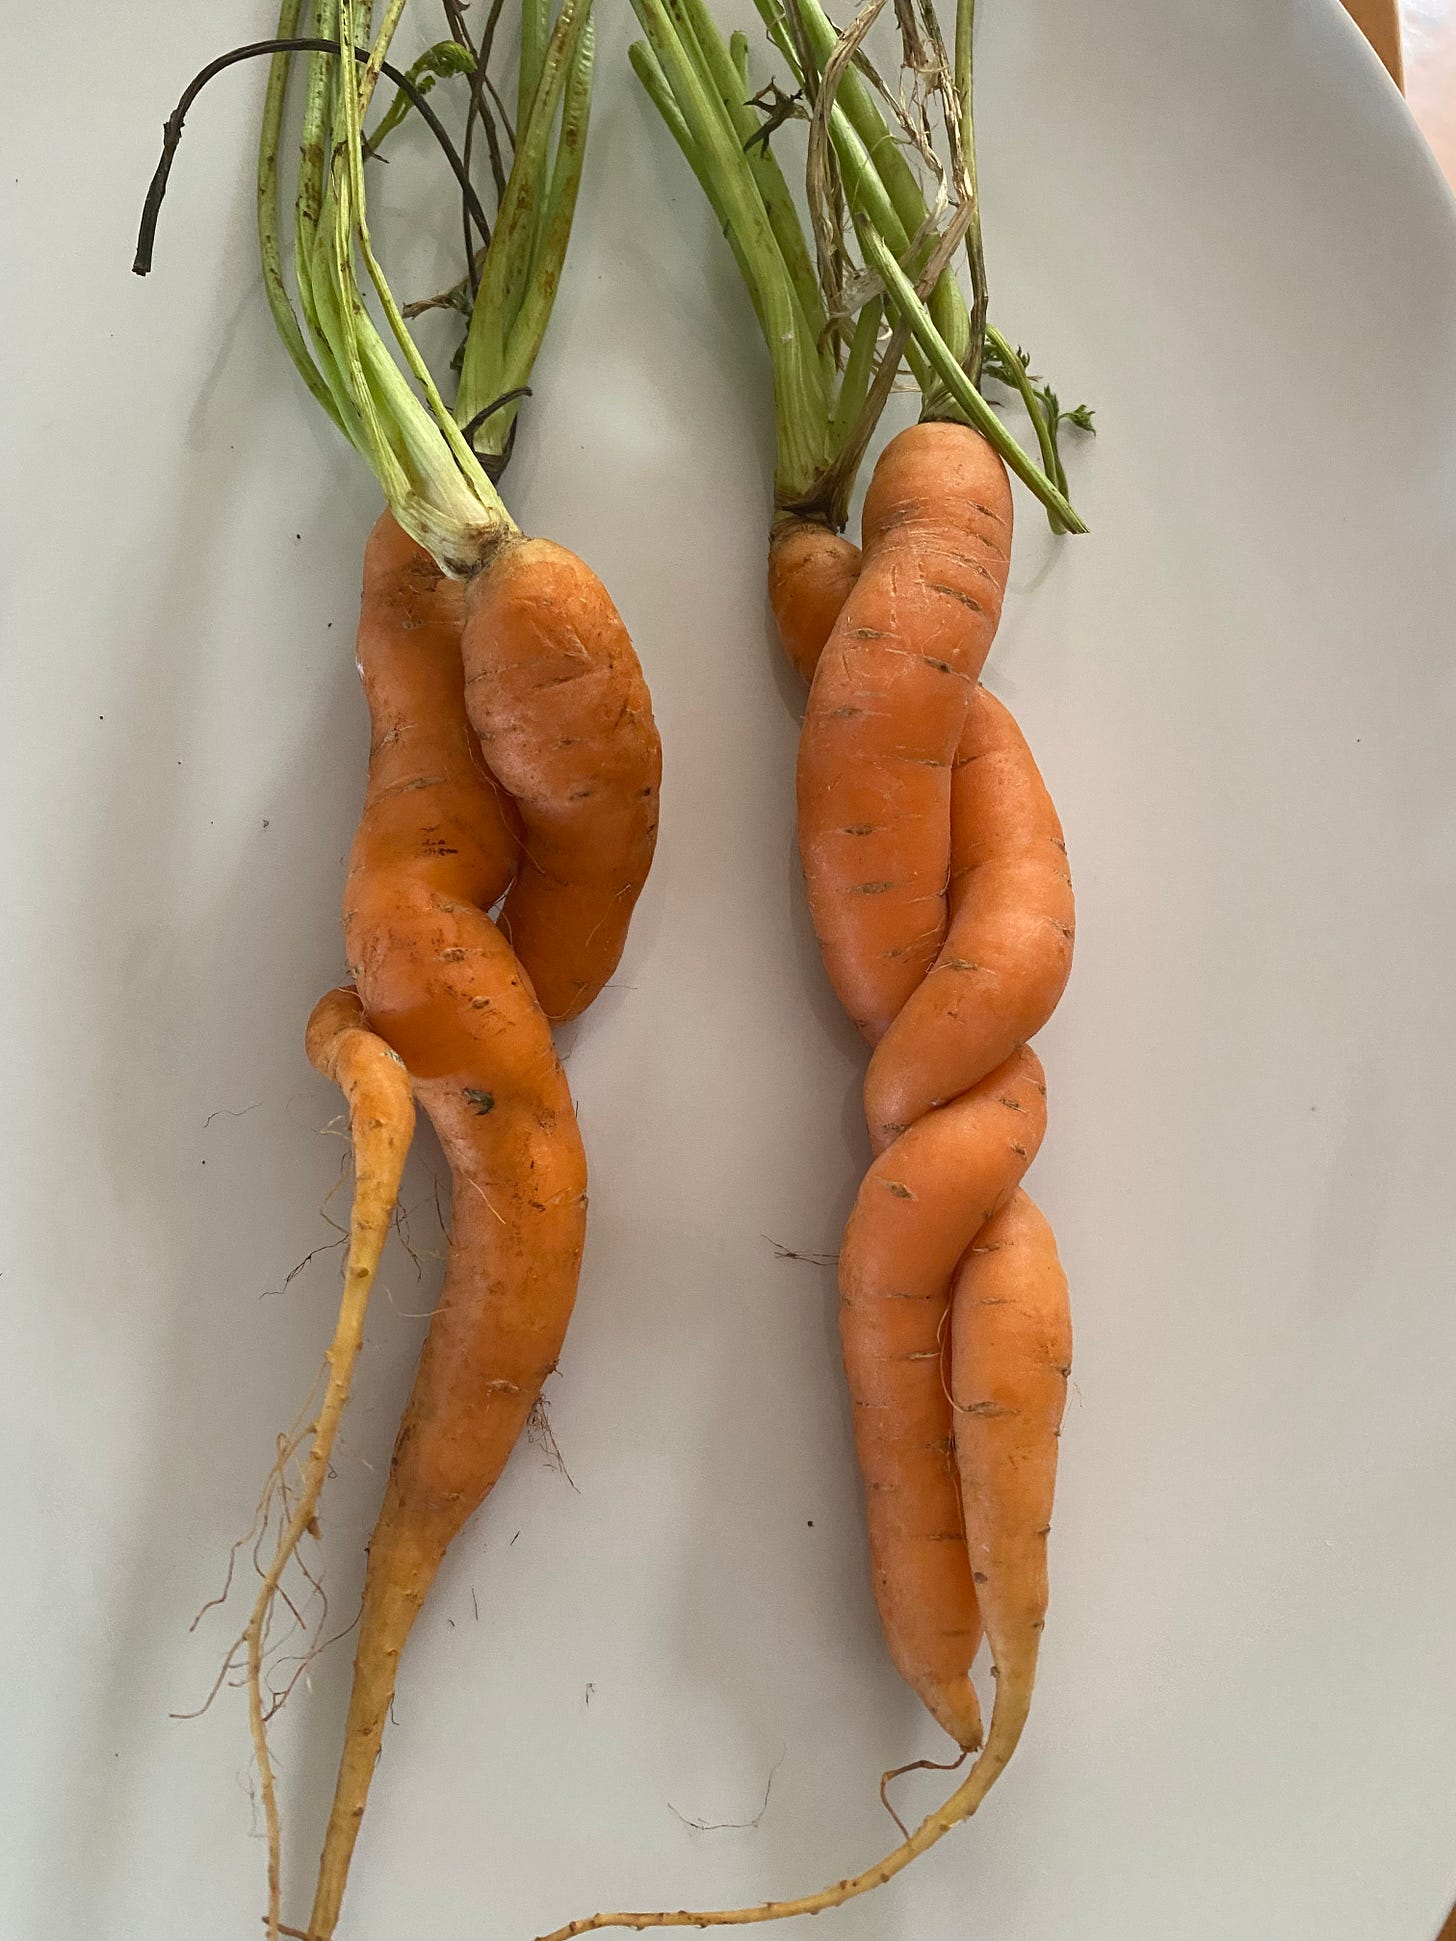 Four carrots each with green tops on a plate, in pairs entwined around each other